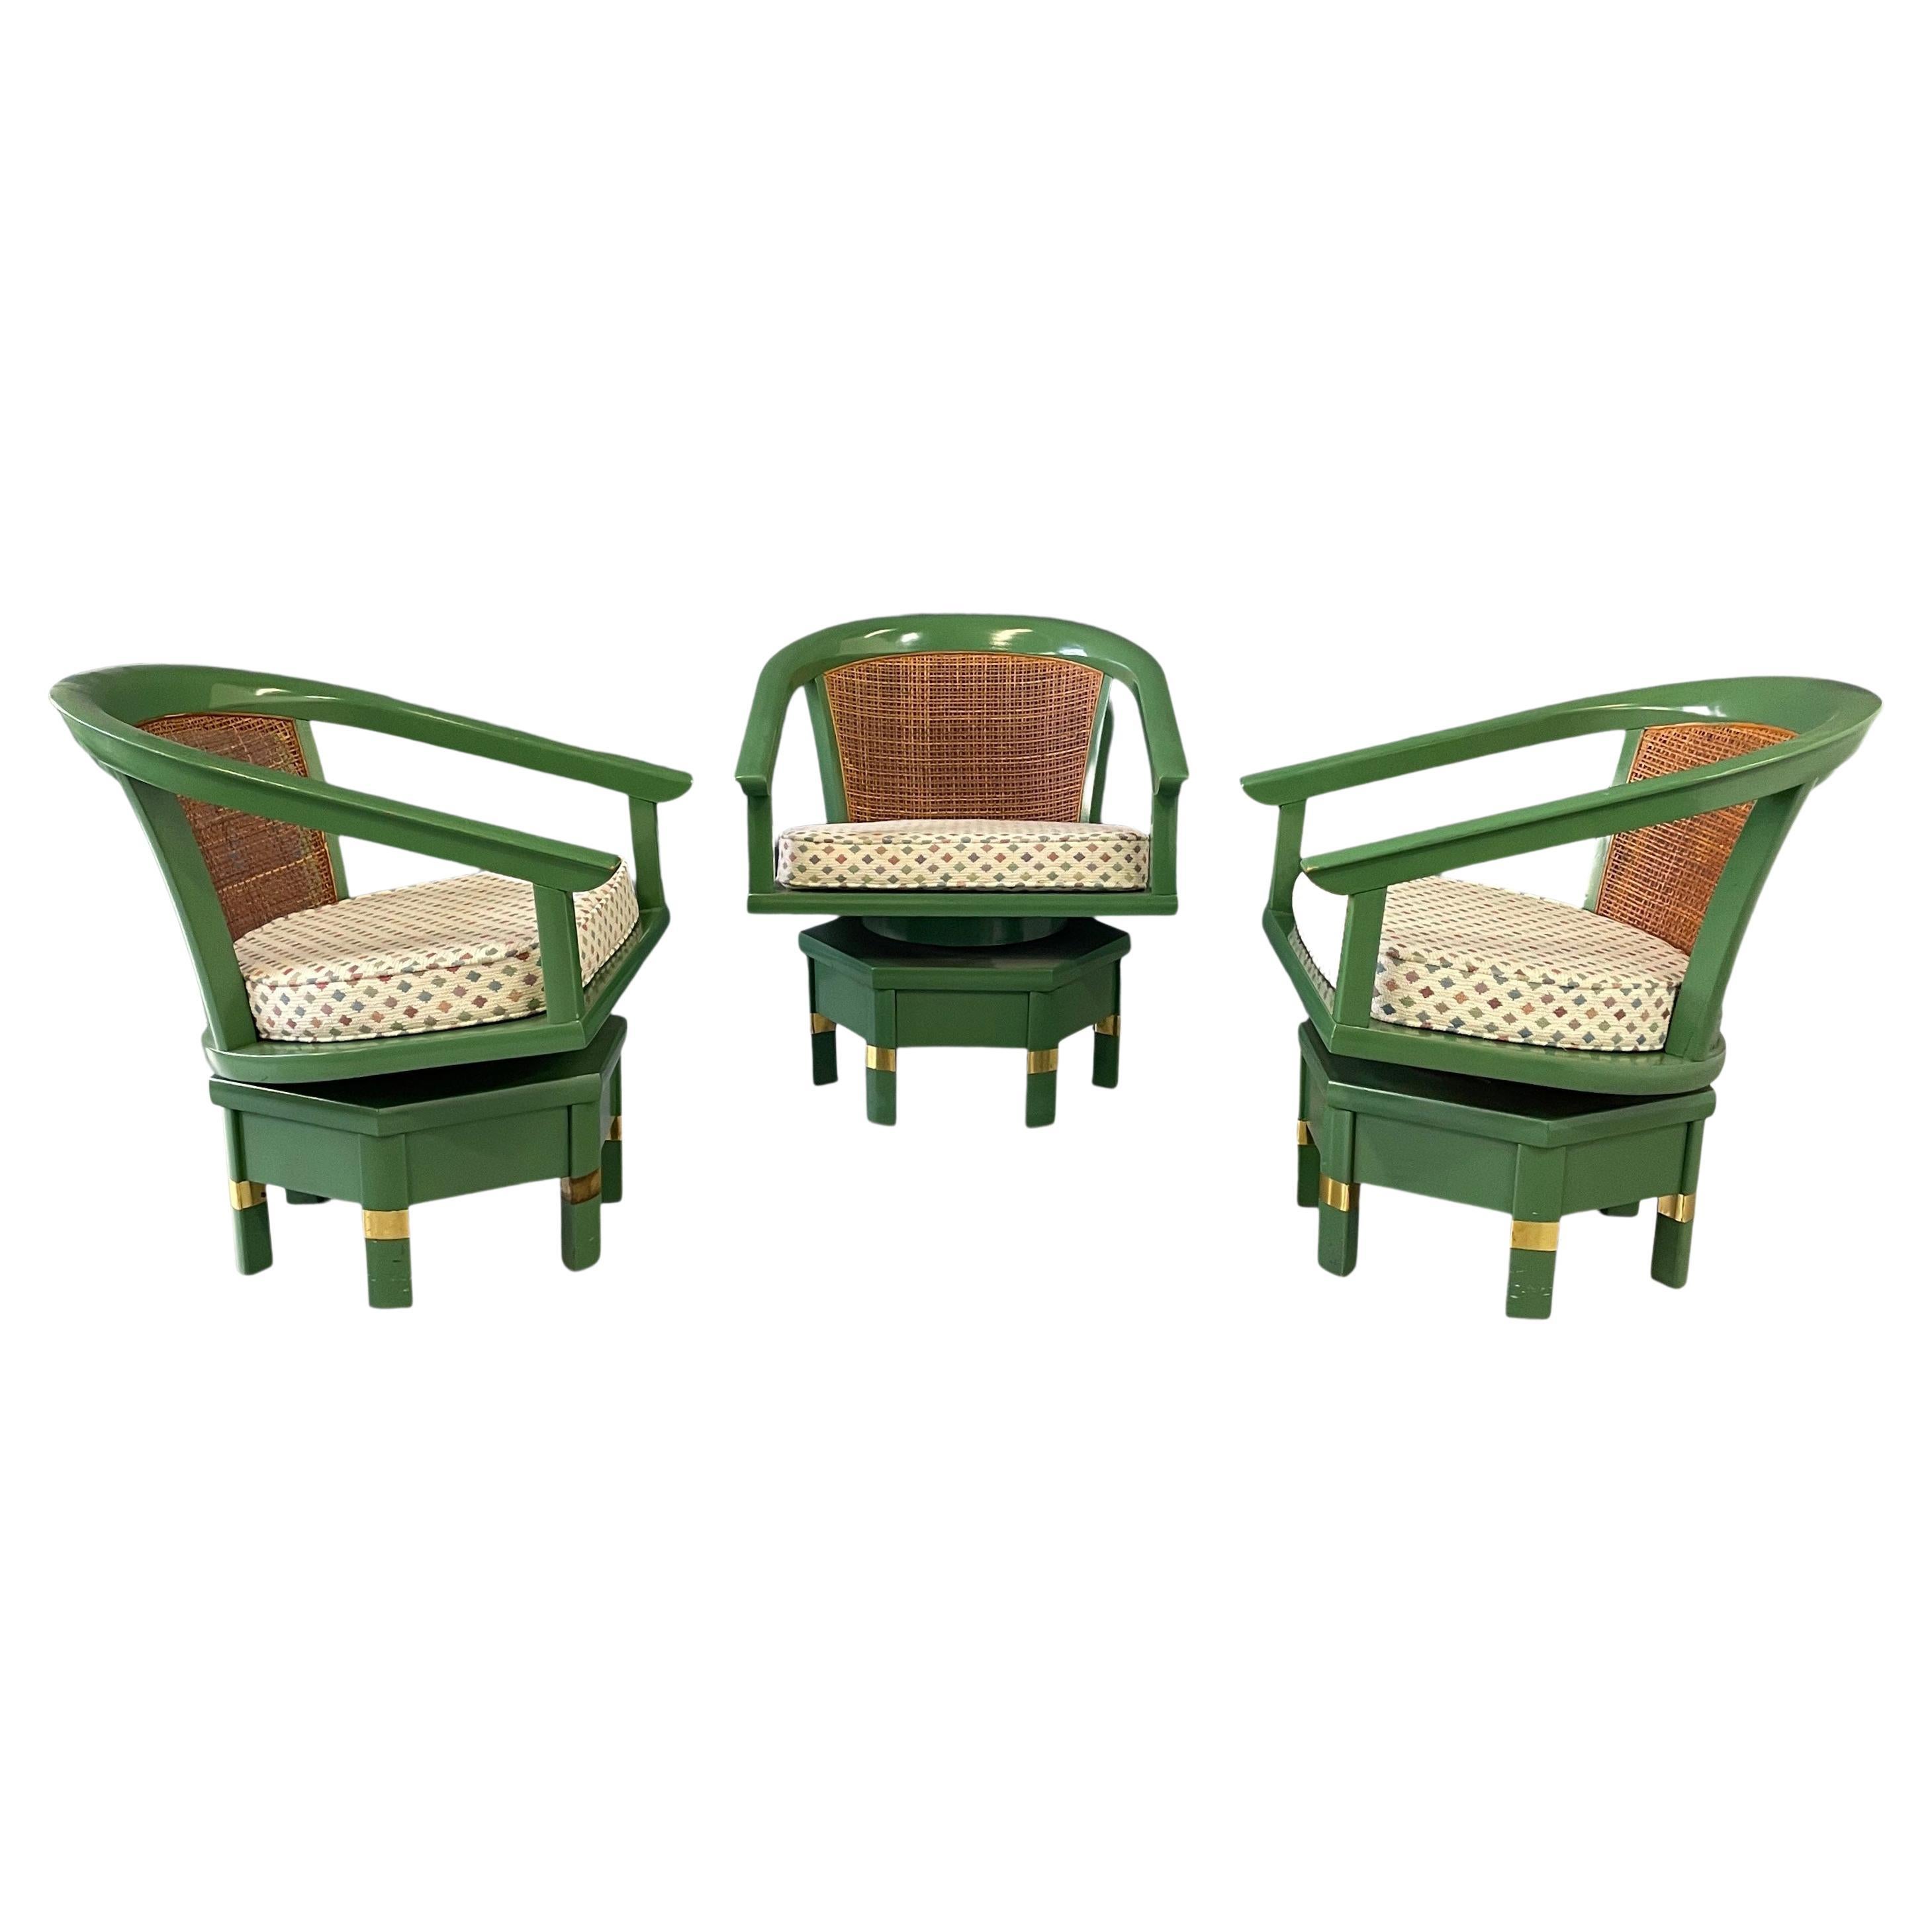 Trio of Cane Back Swivel Lounge Chairs Designed by Jim Peed for Hickory